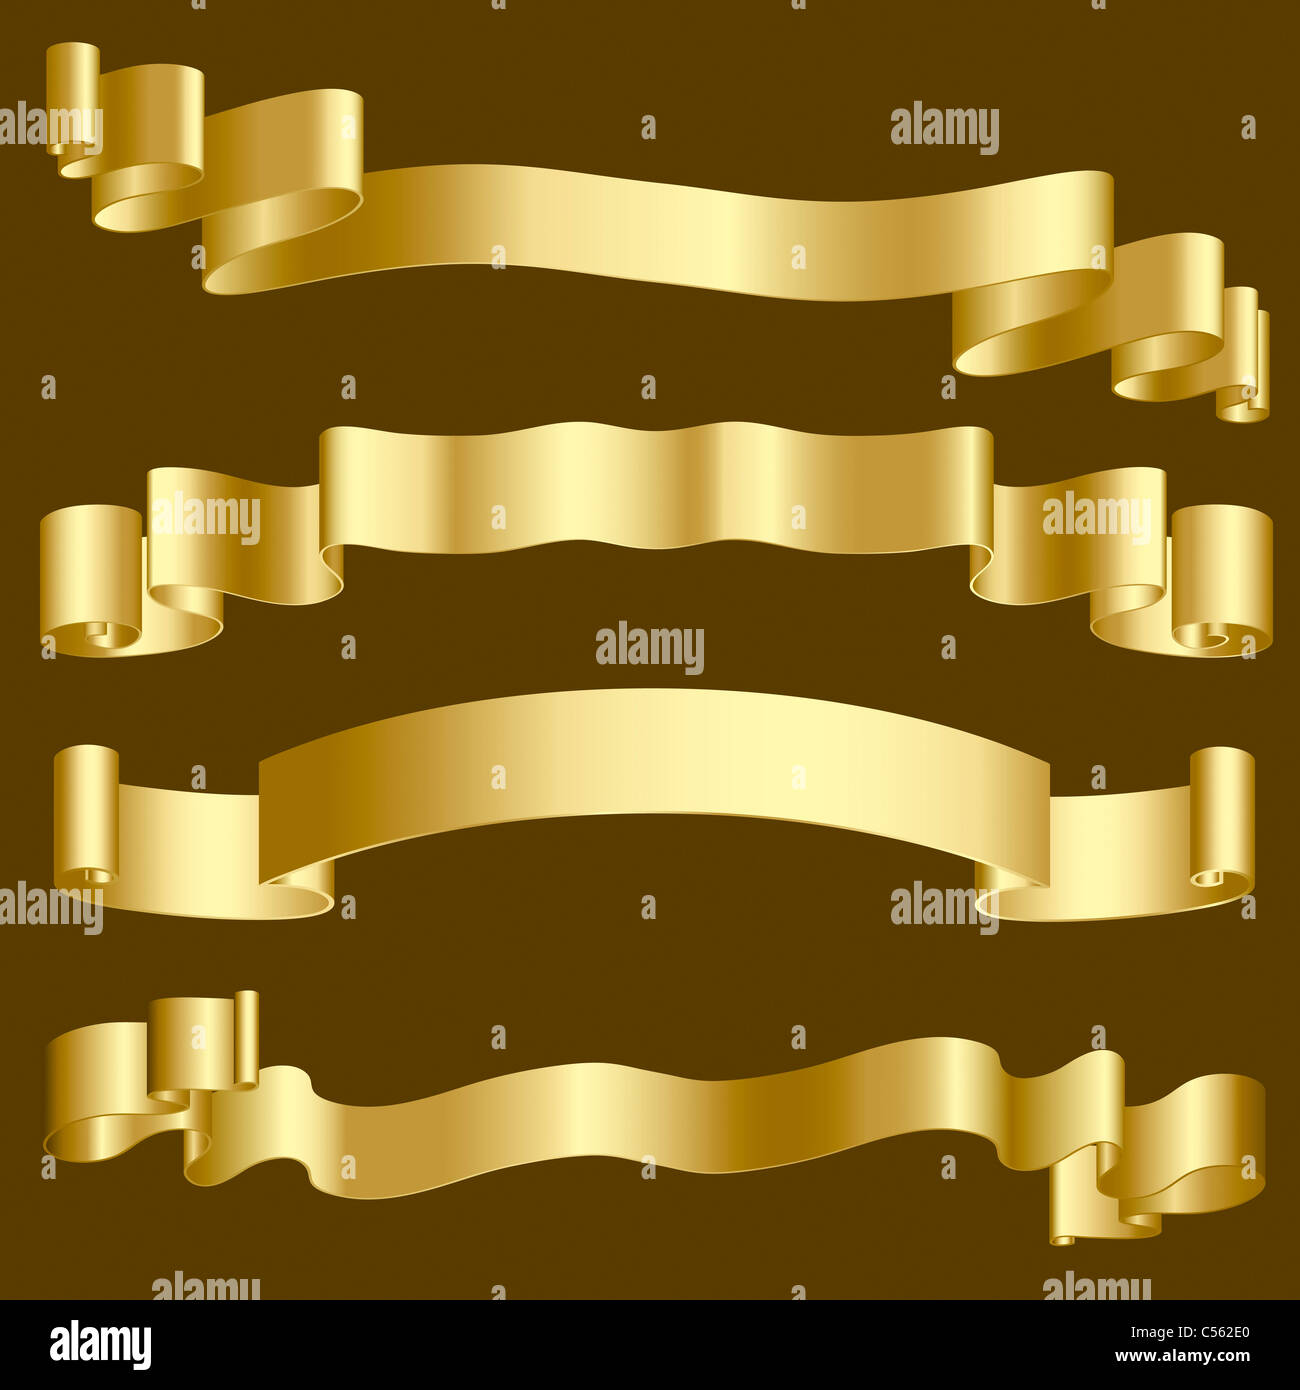 Metallic gold ribbons and banners Stock Photo